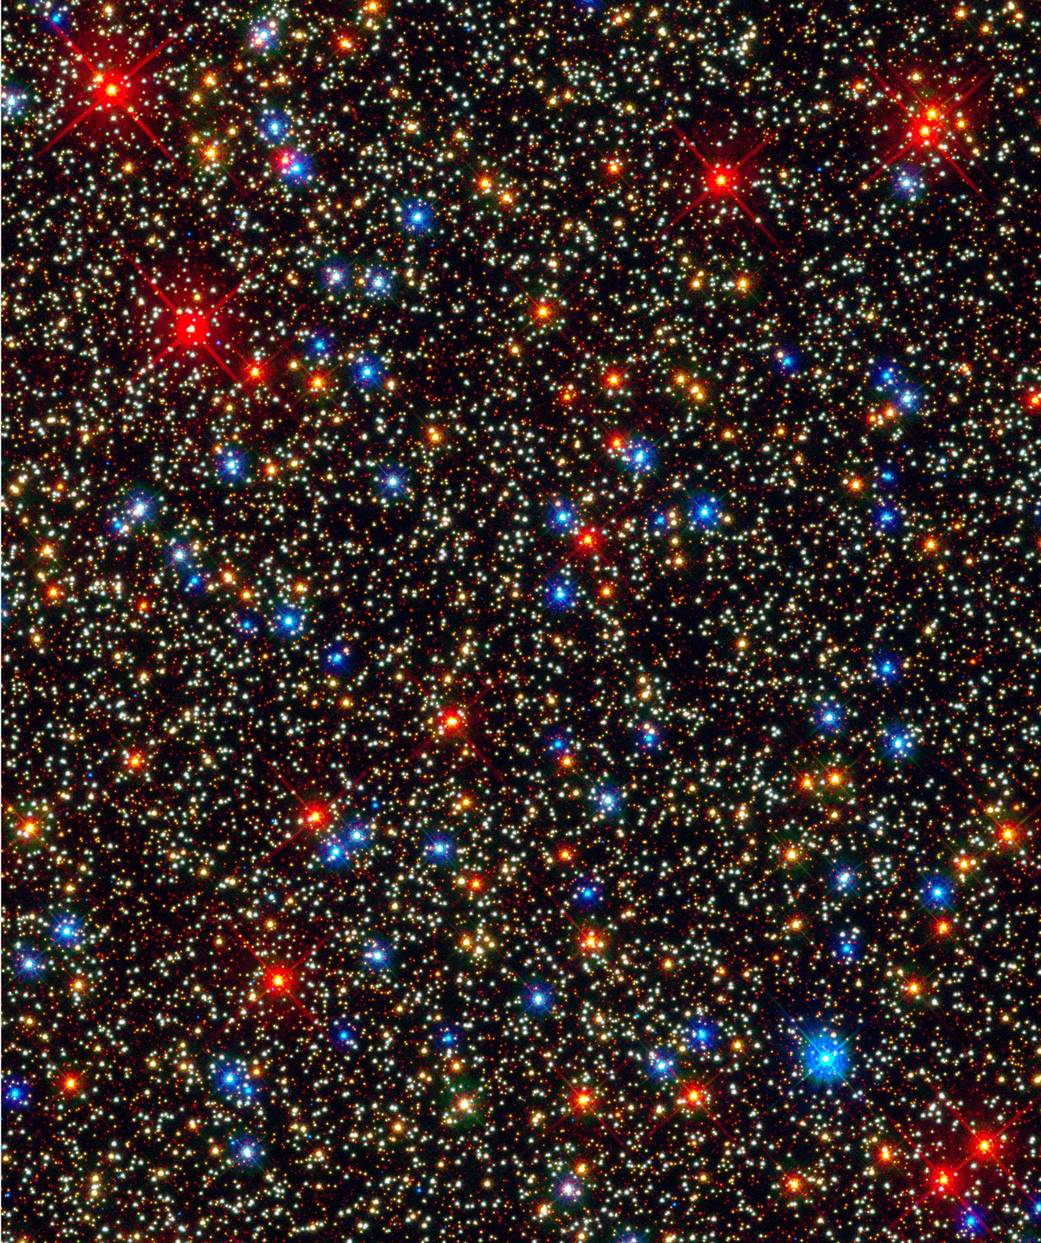 Wide field image of stars with some in white and others in bright yellow blue and red against deep space